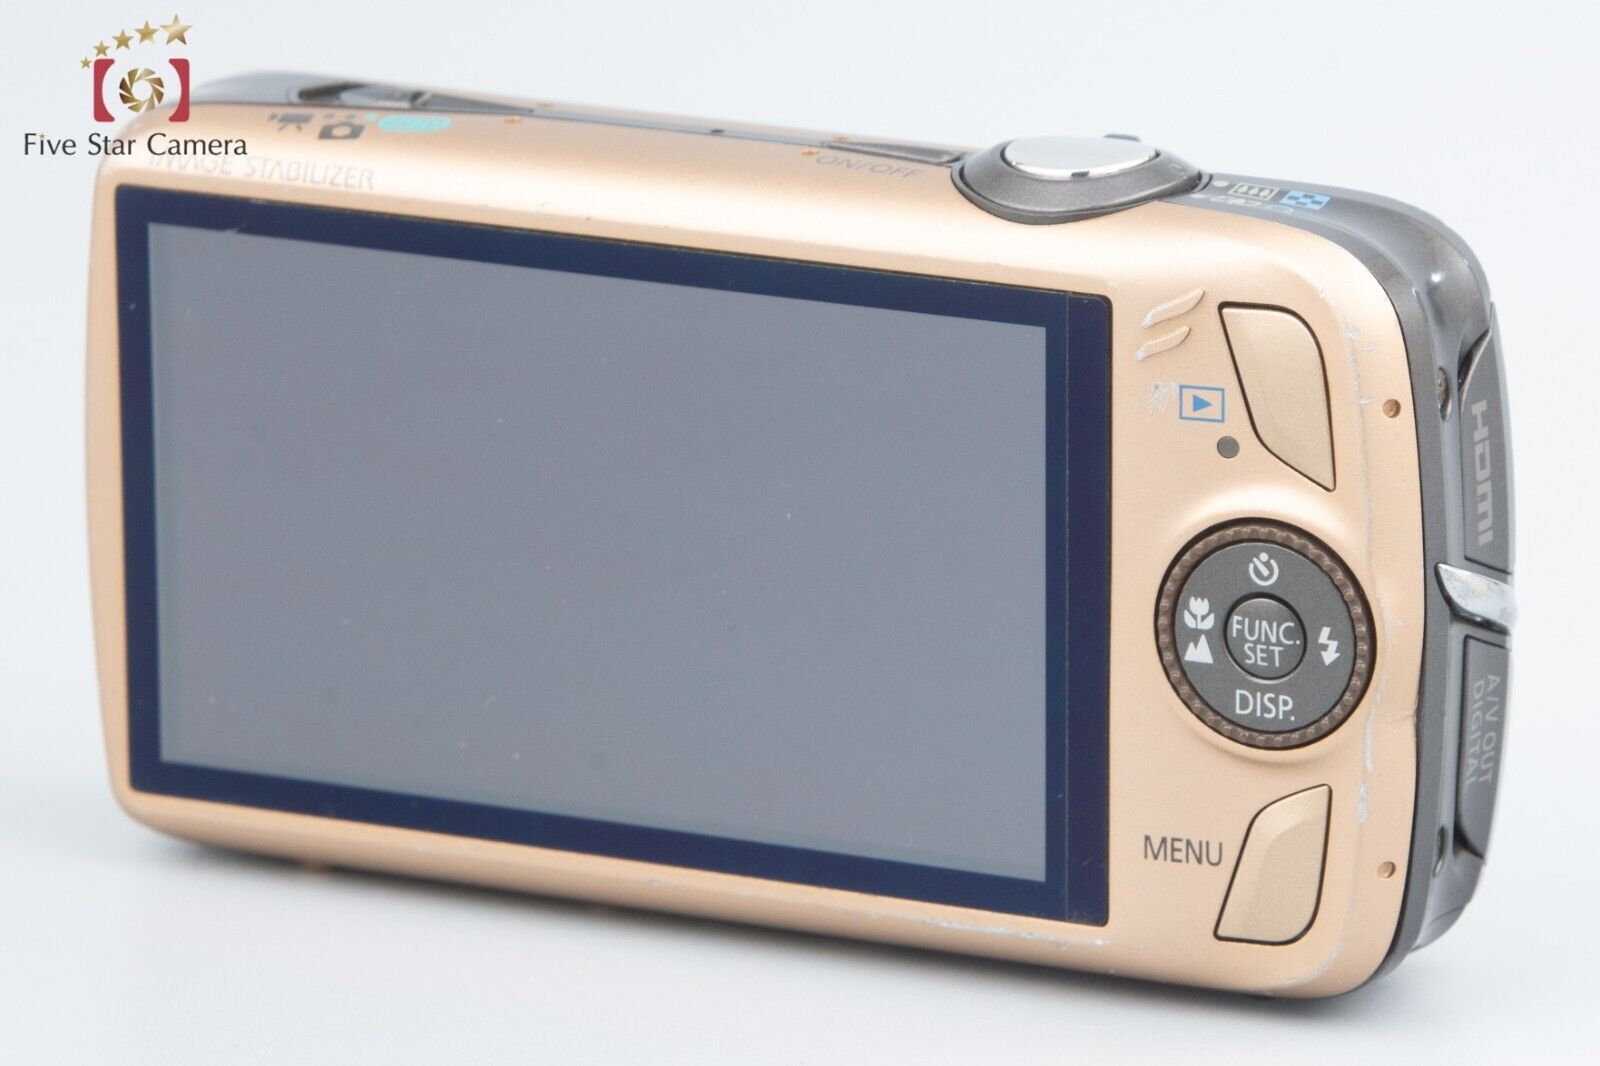 "As-Is" Canon IXY Digital 930 IS Brown 12.1 MP Digital Camera